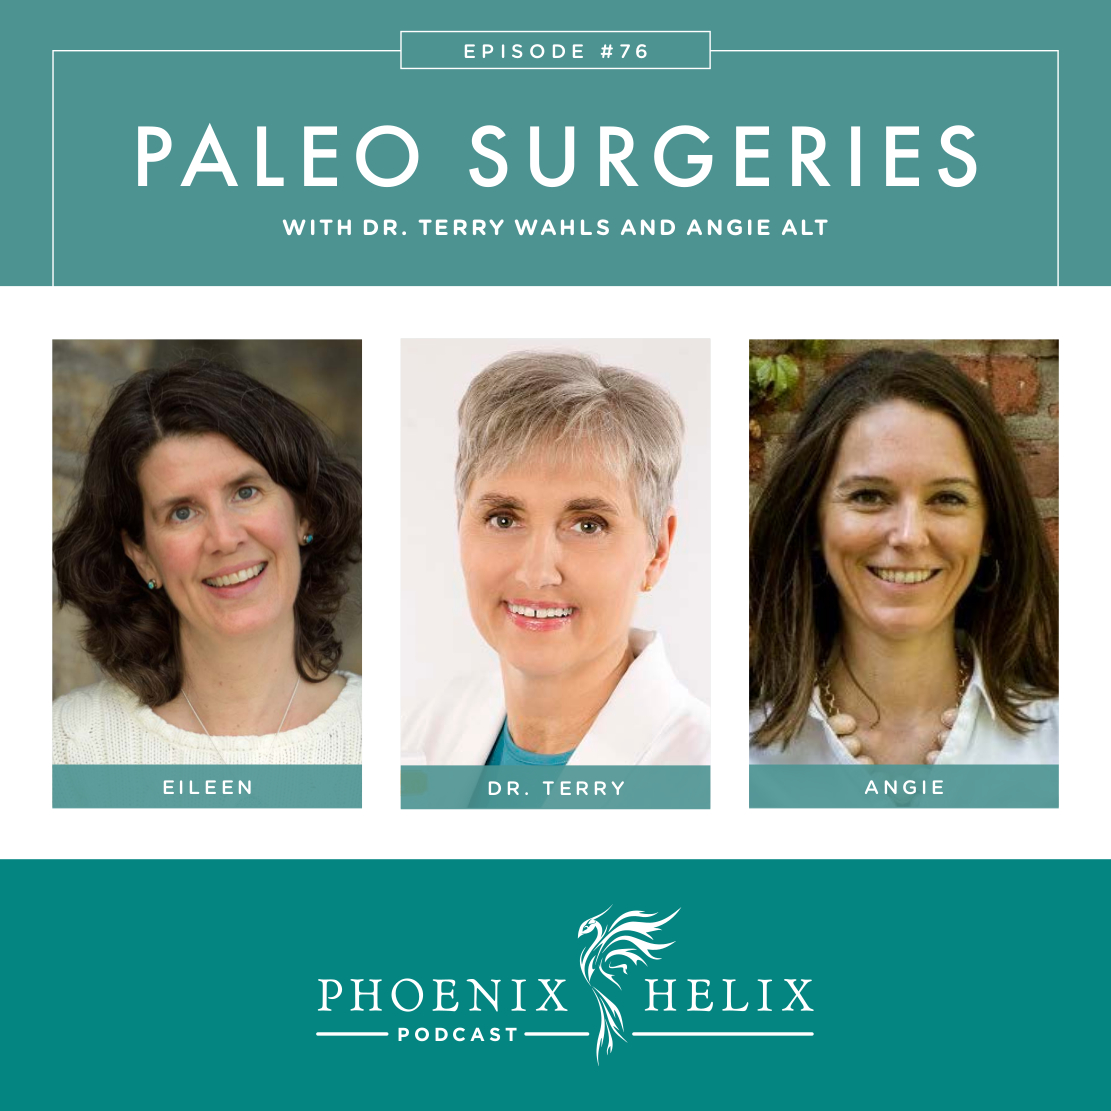 Paleo Surgery Advice with Dr. Terry Wahls and Angie Alt | Phoenix Helix Podcast